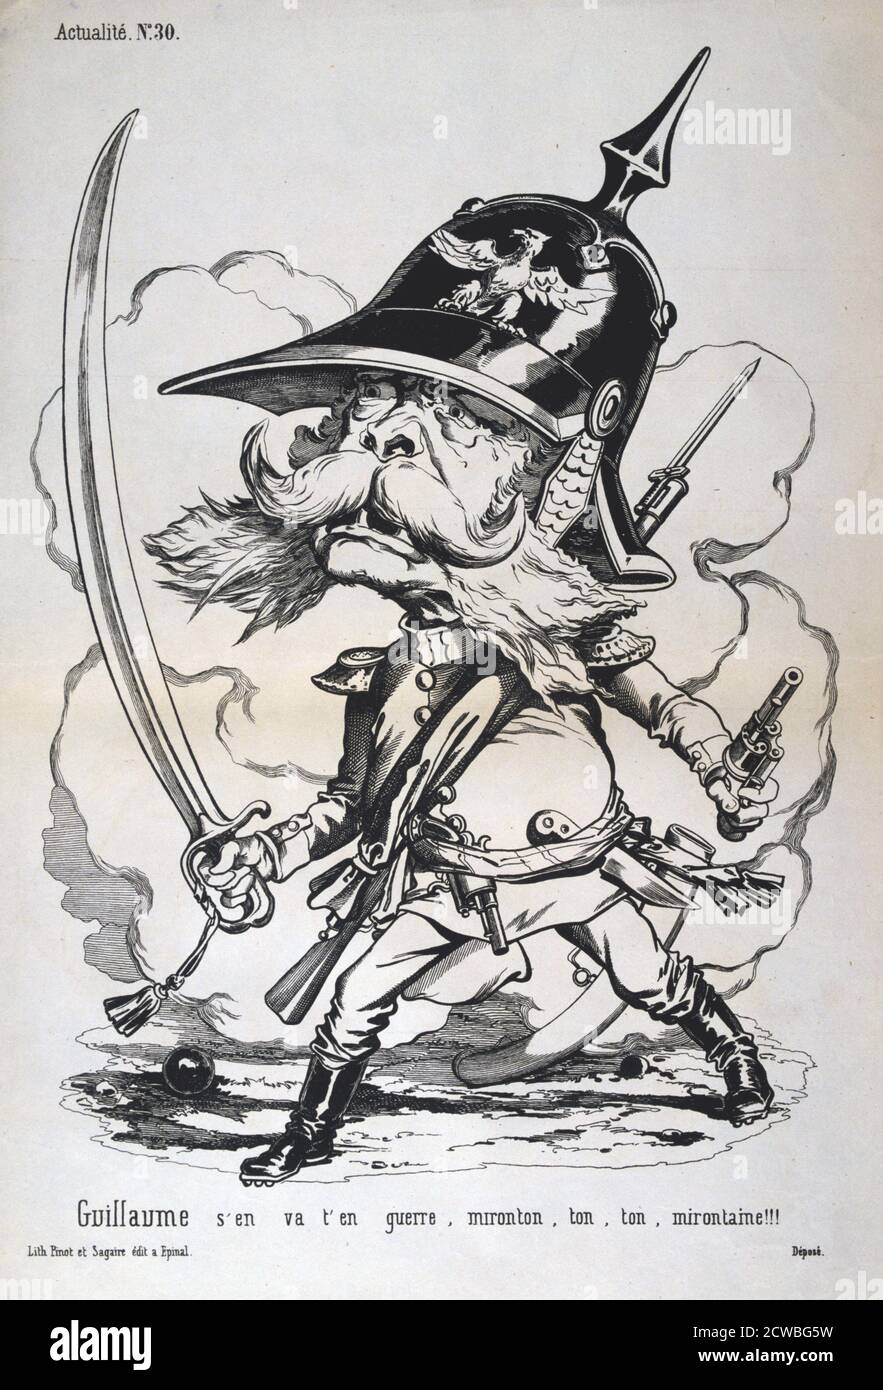 Caricature of Wilhelm I of Prussia, Franco-Prussian war, 1870-1871. From a private collection. Stock Photo